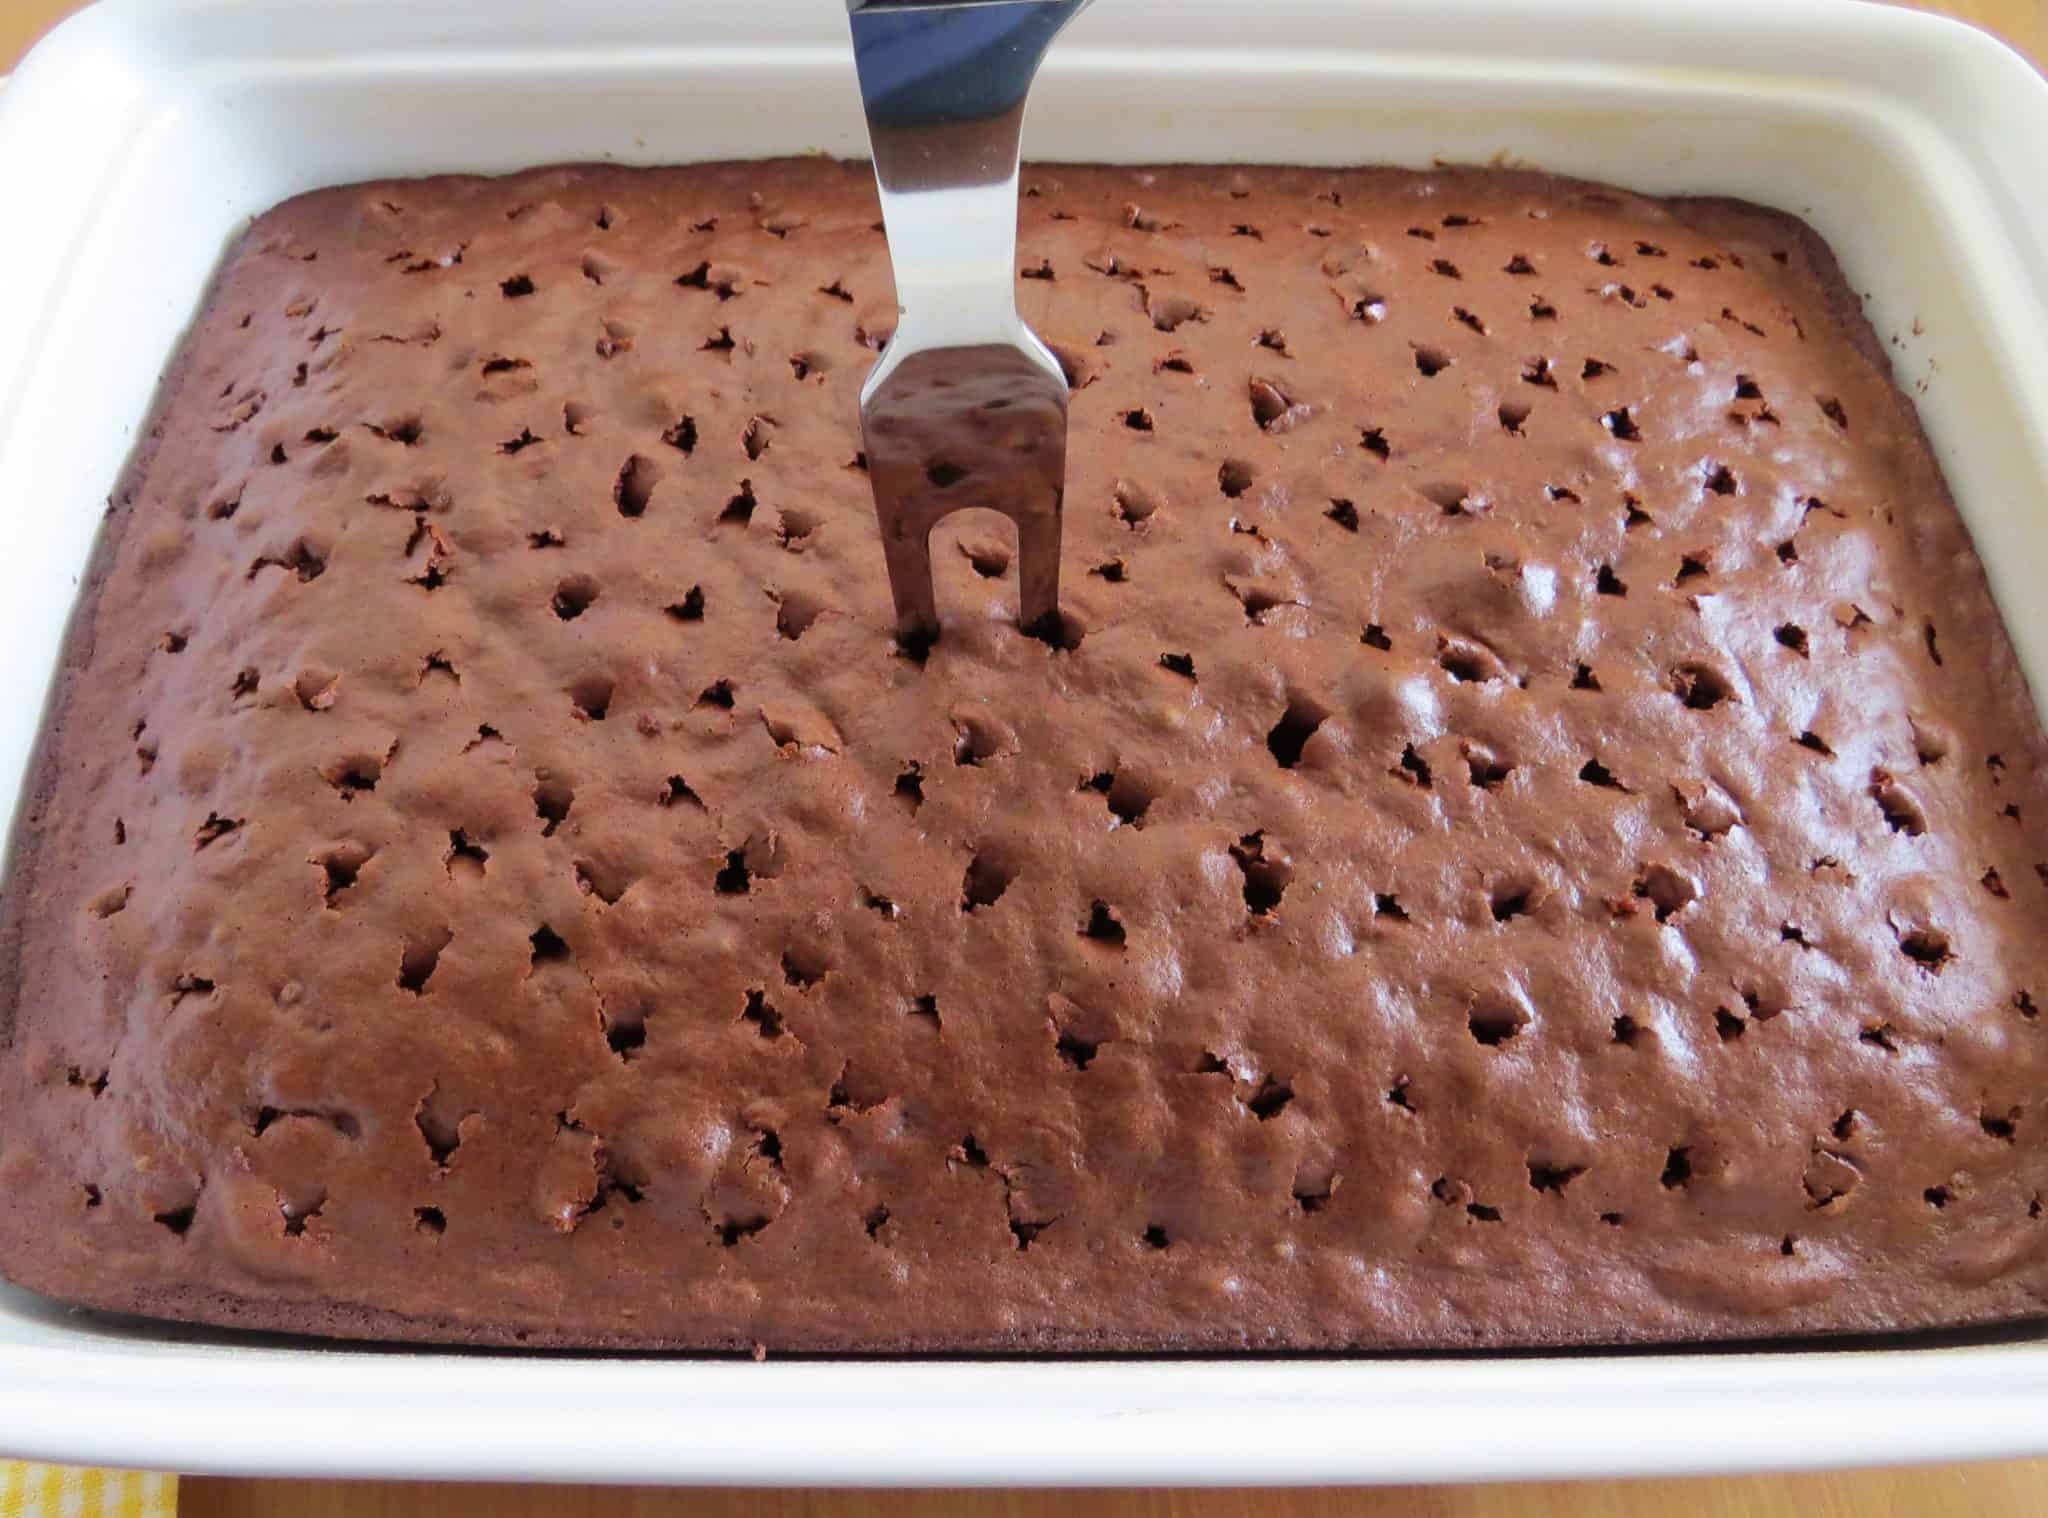 a large meat fork piercing holes in fully baked chocolate cake in a white baking dish.